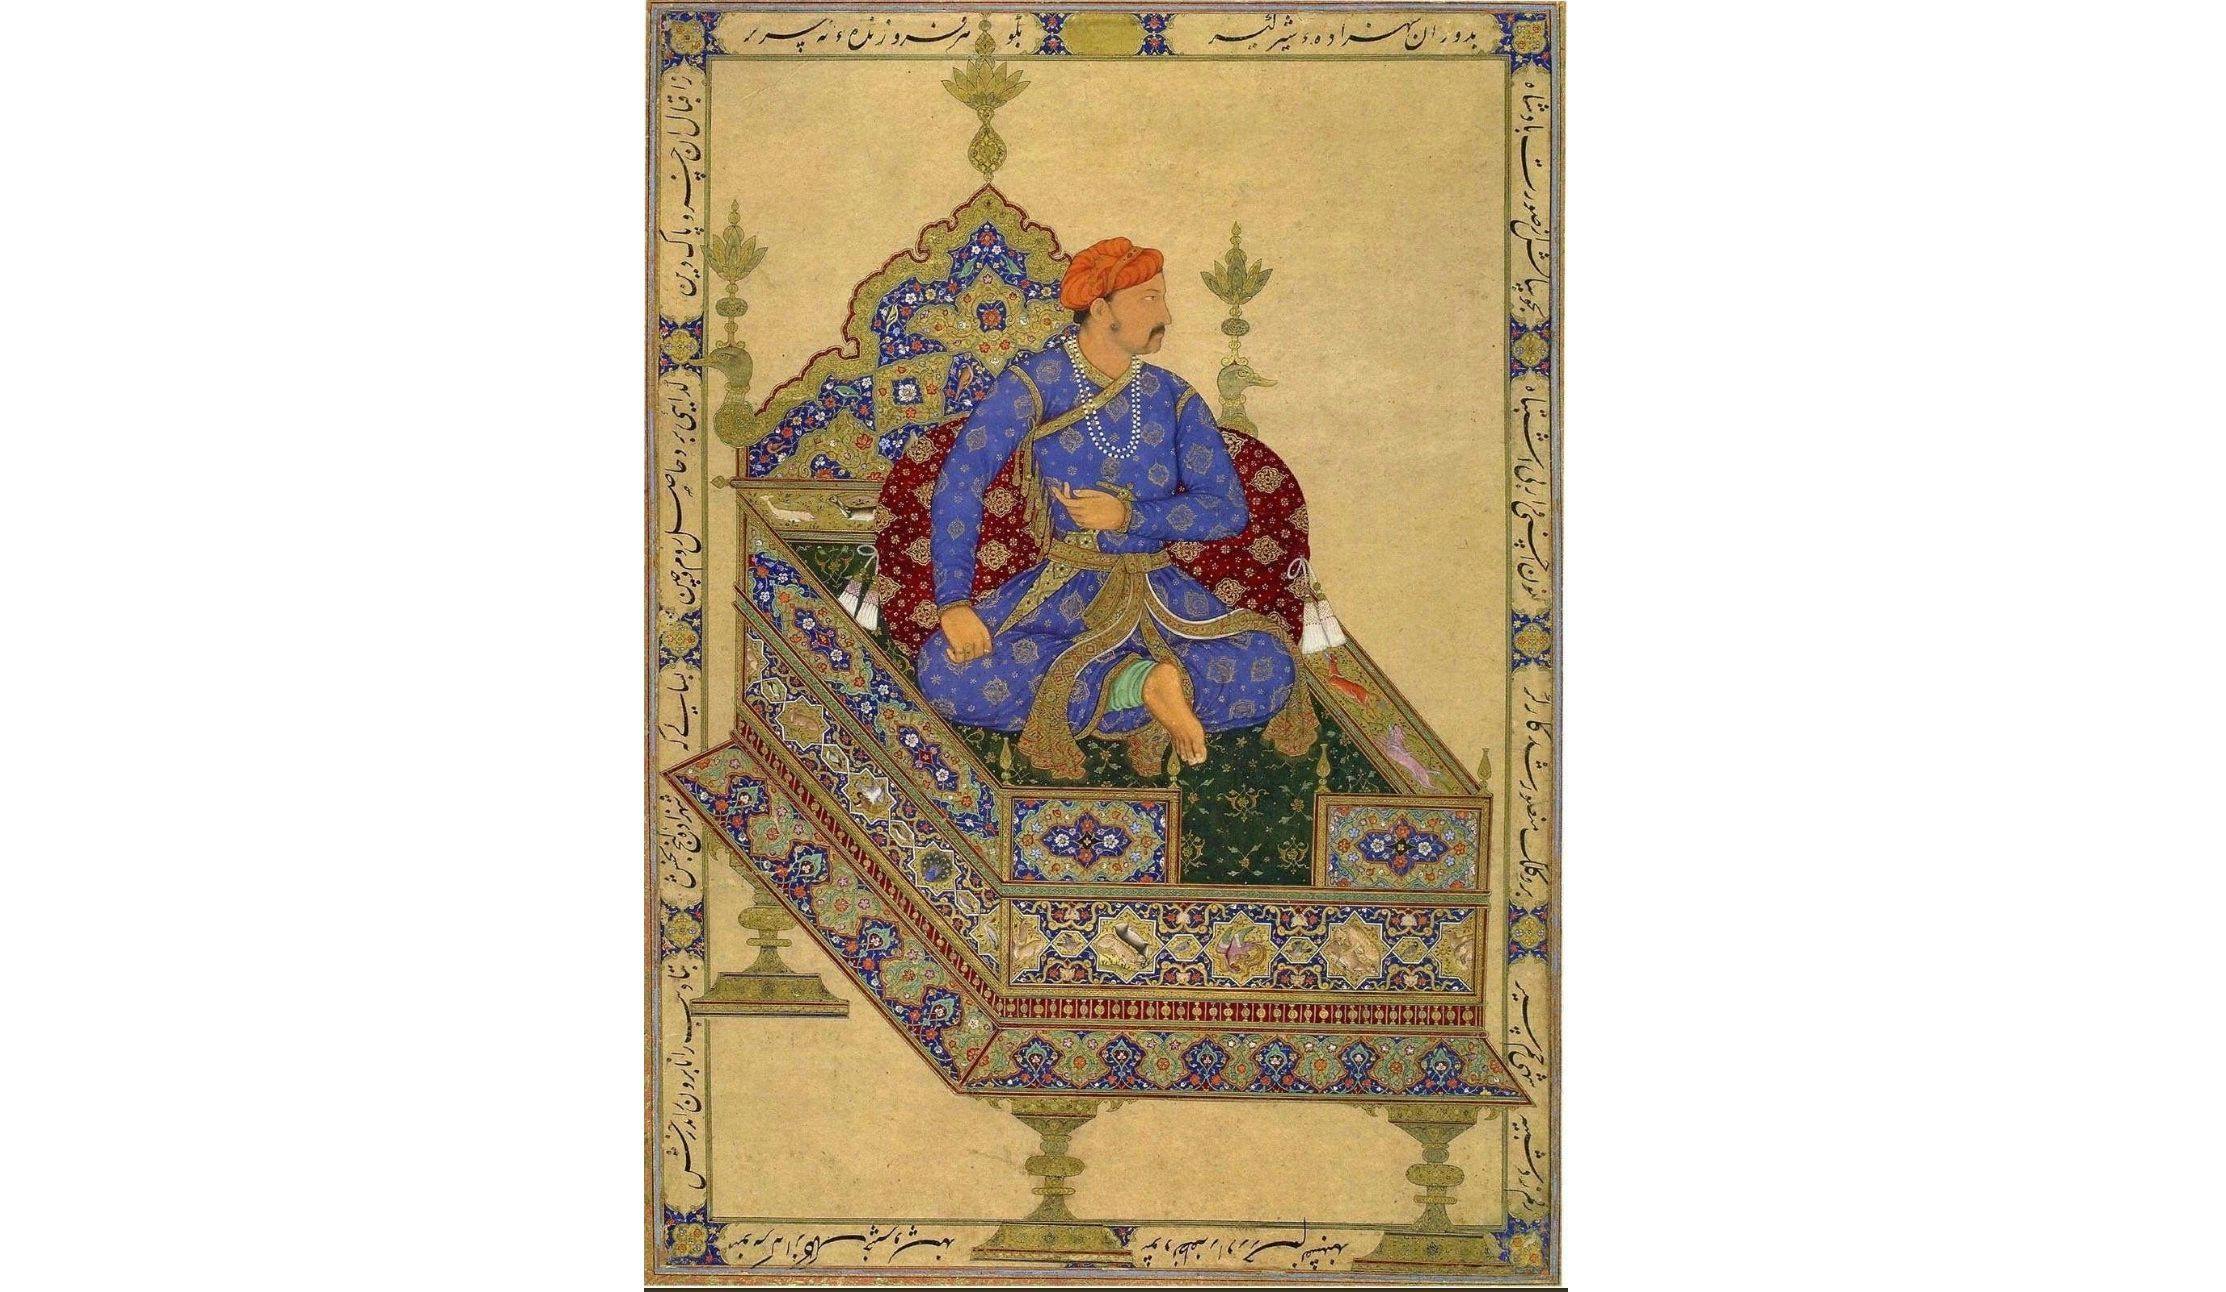 Shahzada Salim (Jahangir) depicted as the Emperor by Mansur